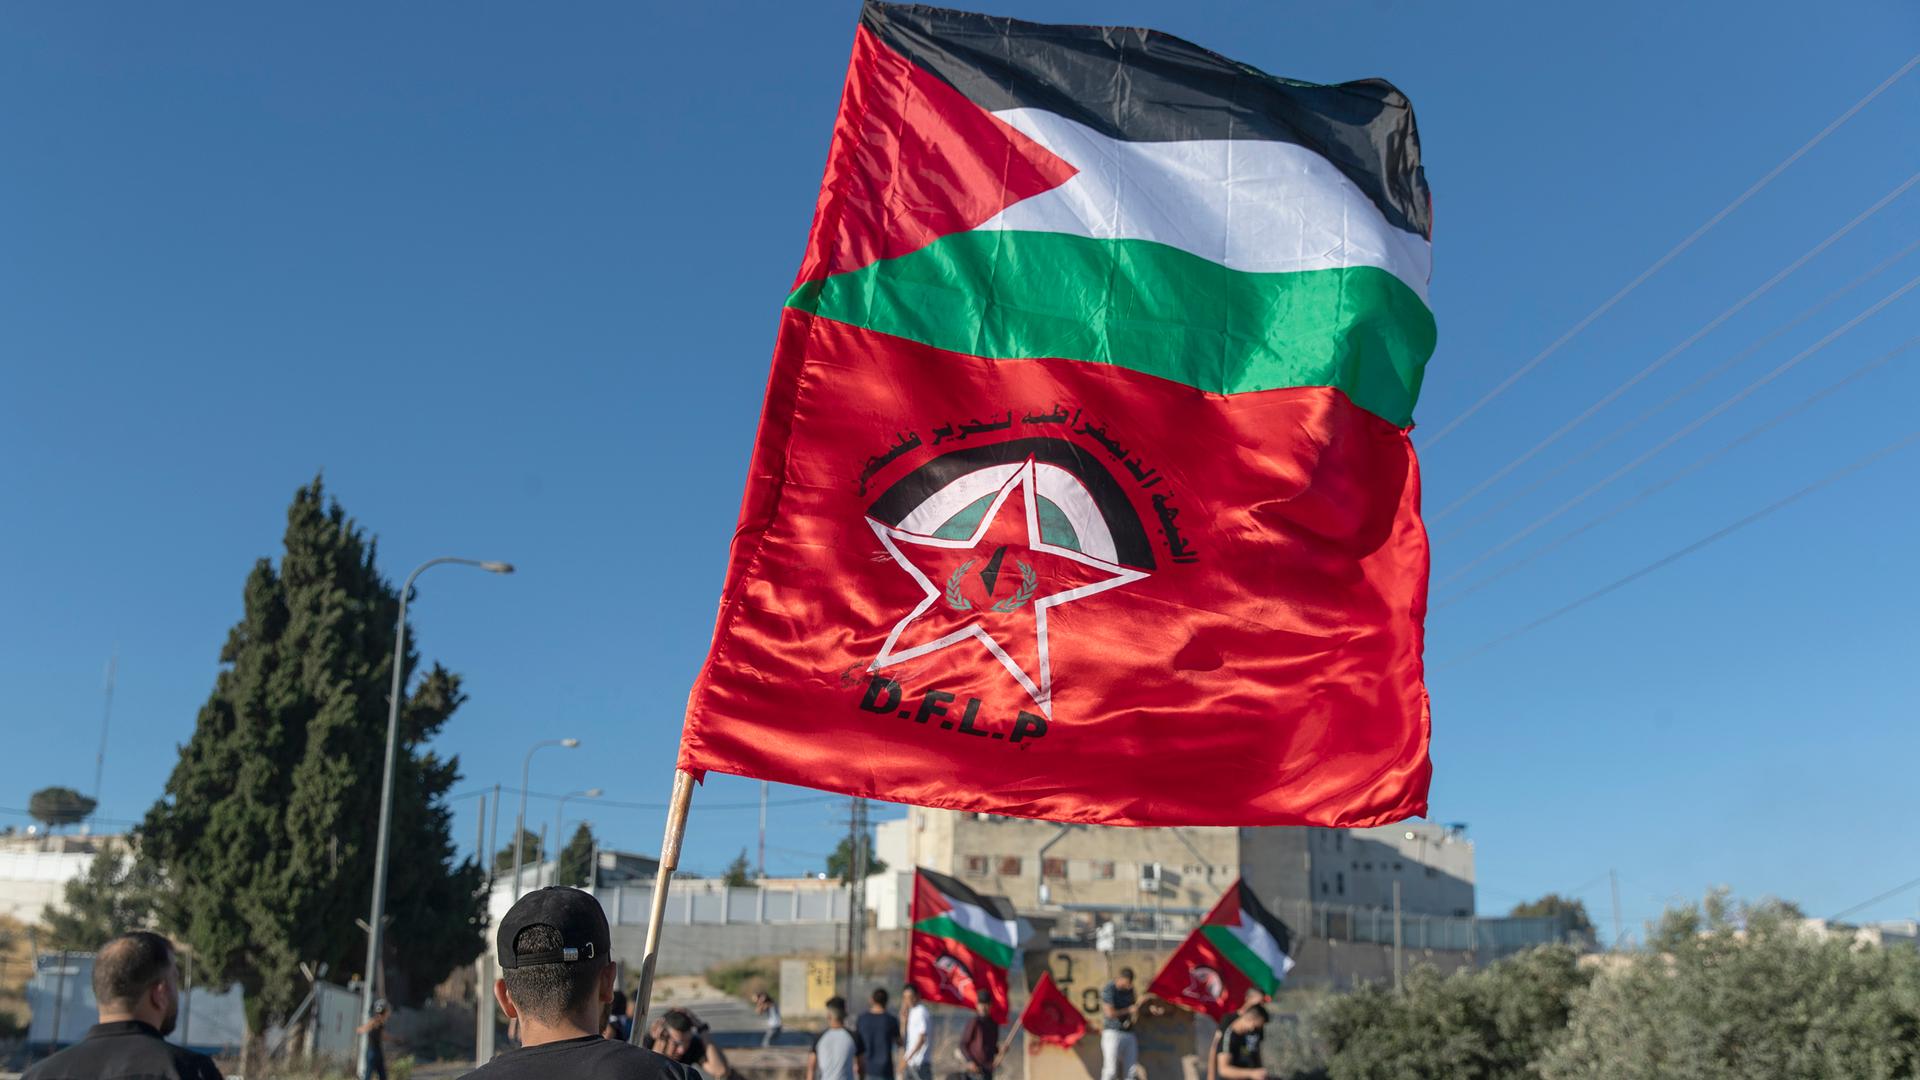 Palestinian protesters fly Palestinian flags and flags of the Democratic Front for the Liberation of Palestine, DFLP, during clashes with Israeli soldiers at the entrance the Jewish settlement of Beit El, background near the West Bank city of Ramallah.